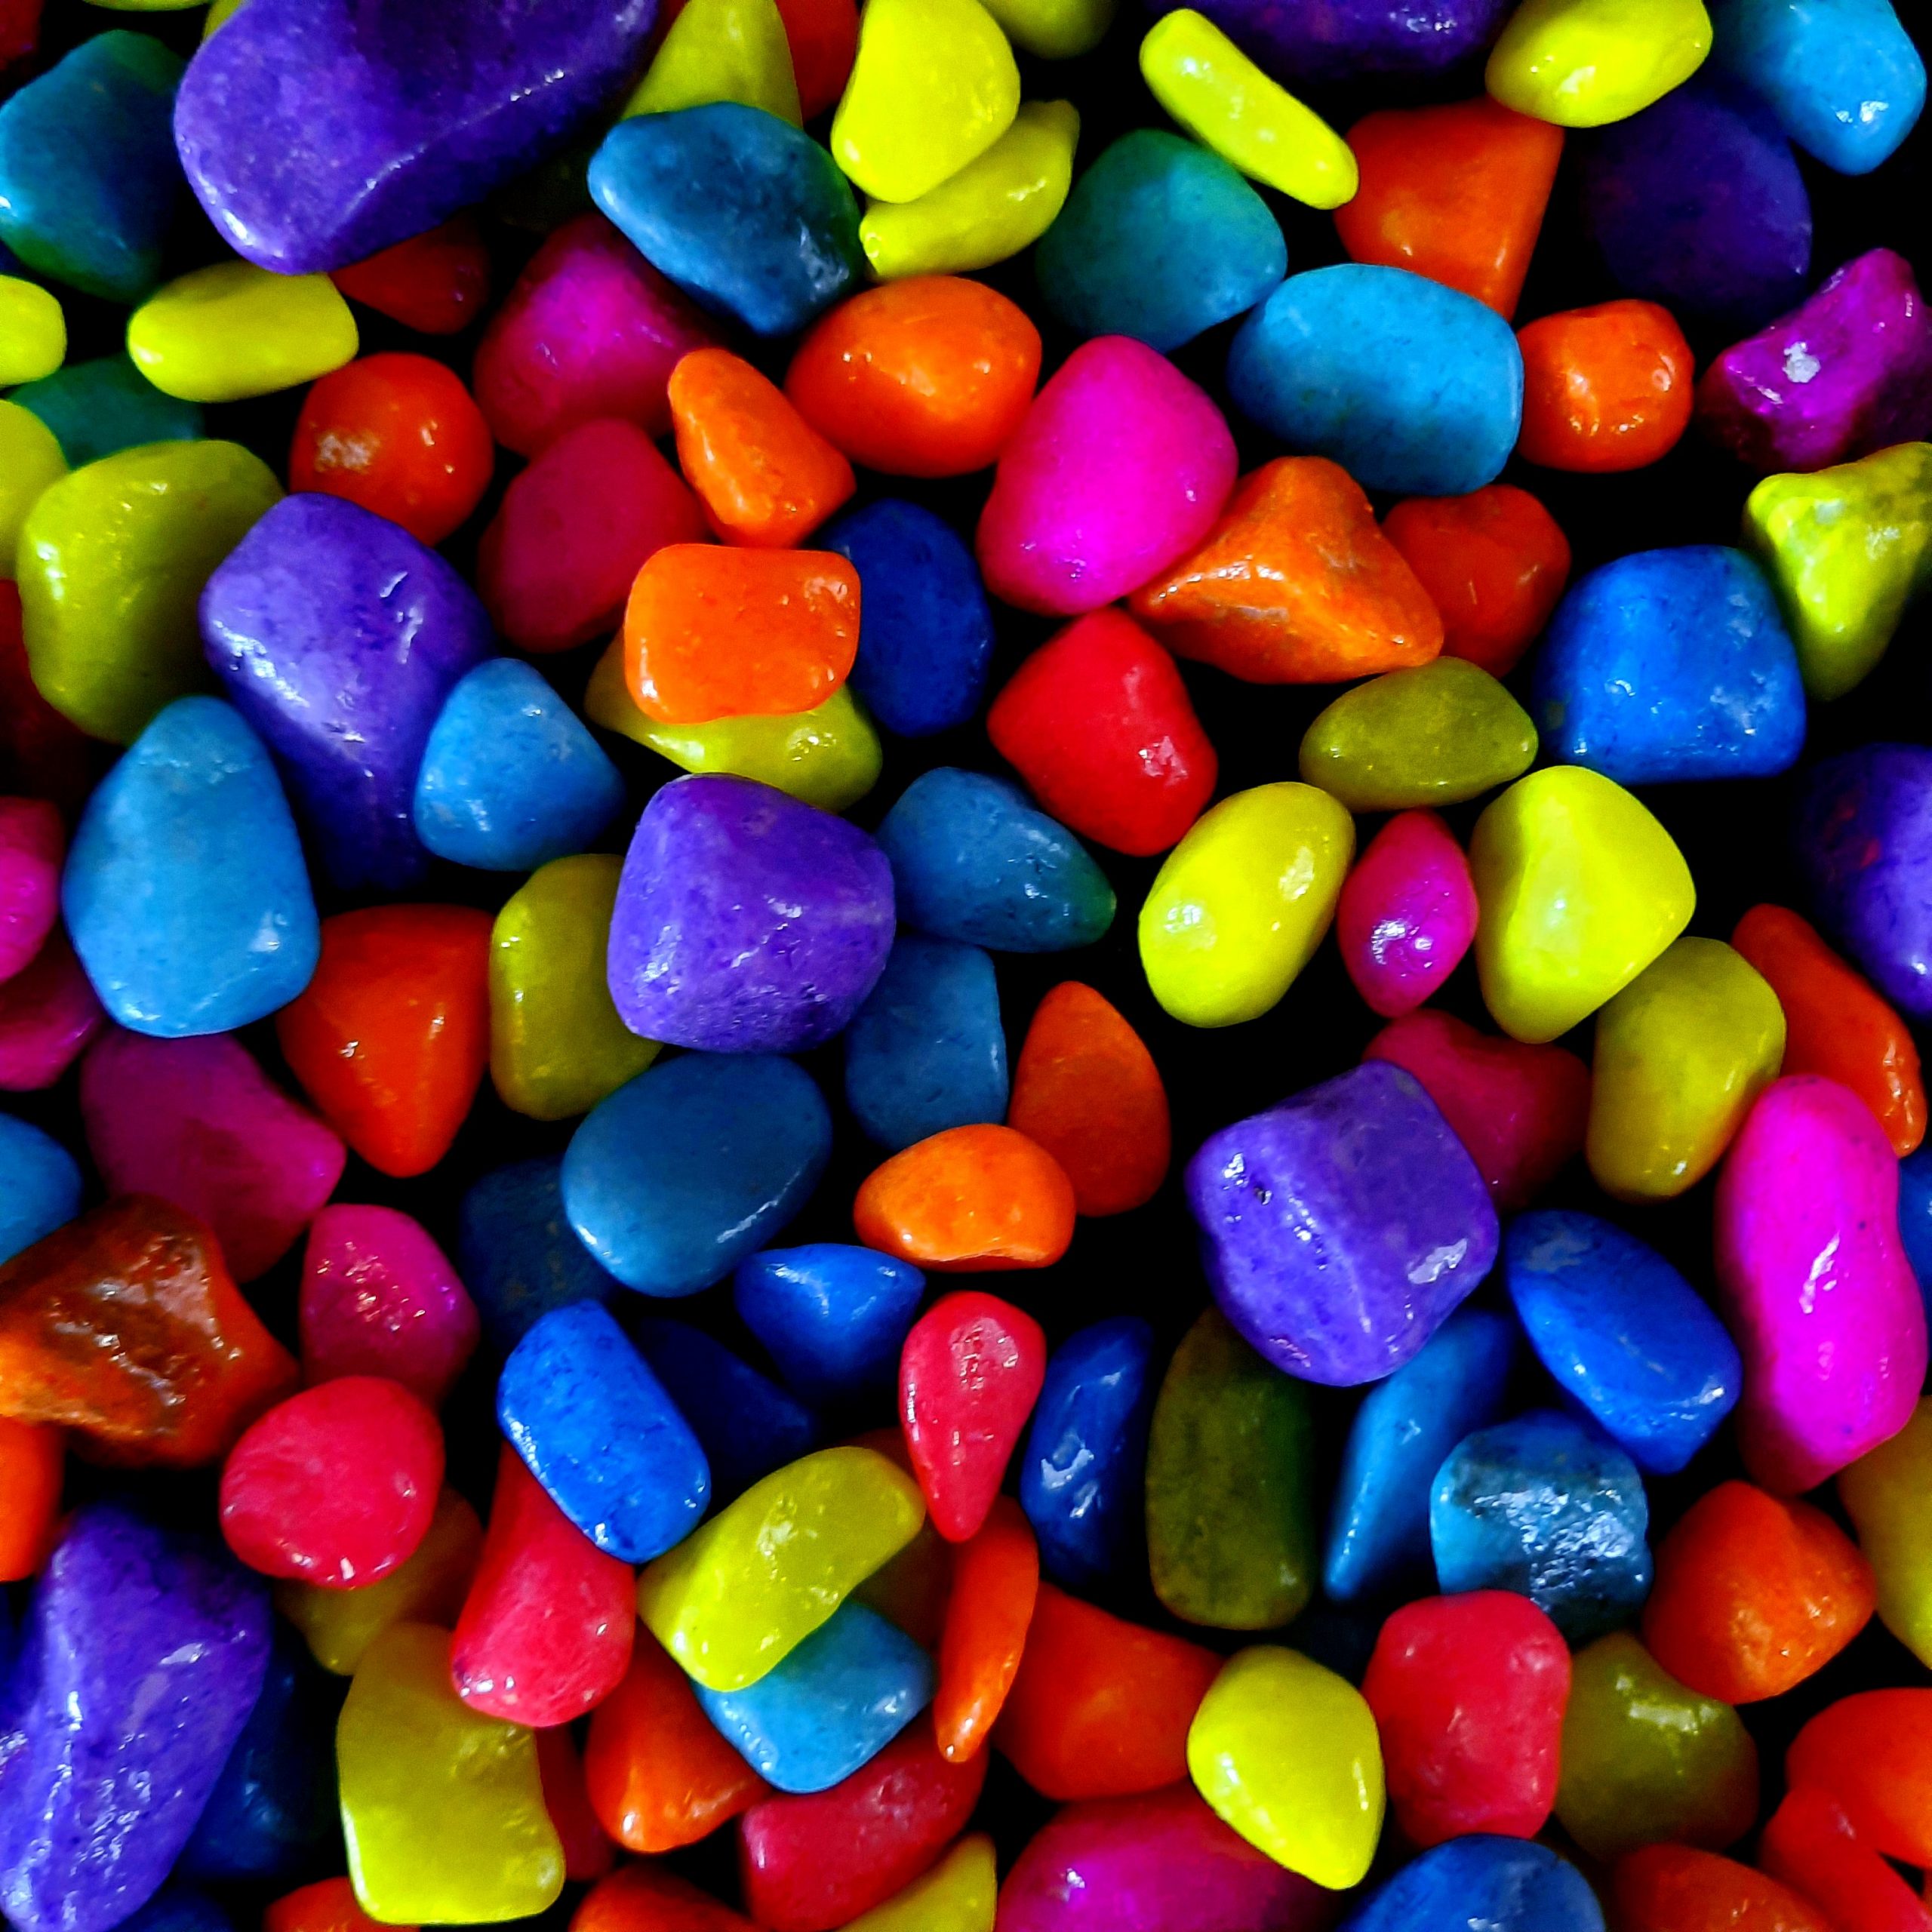 Colorful stones